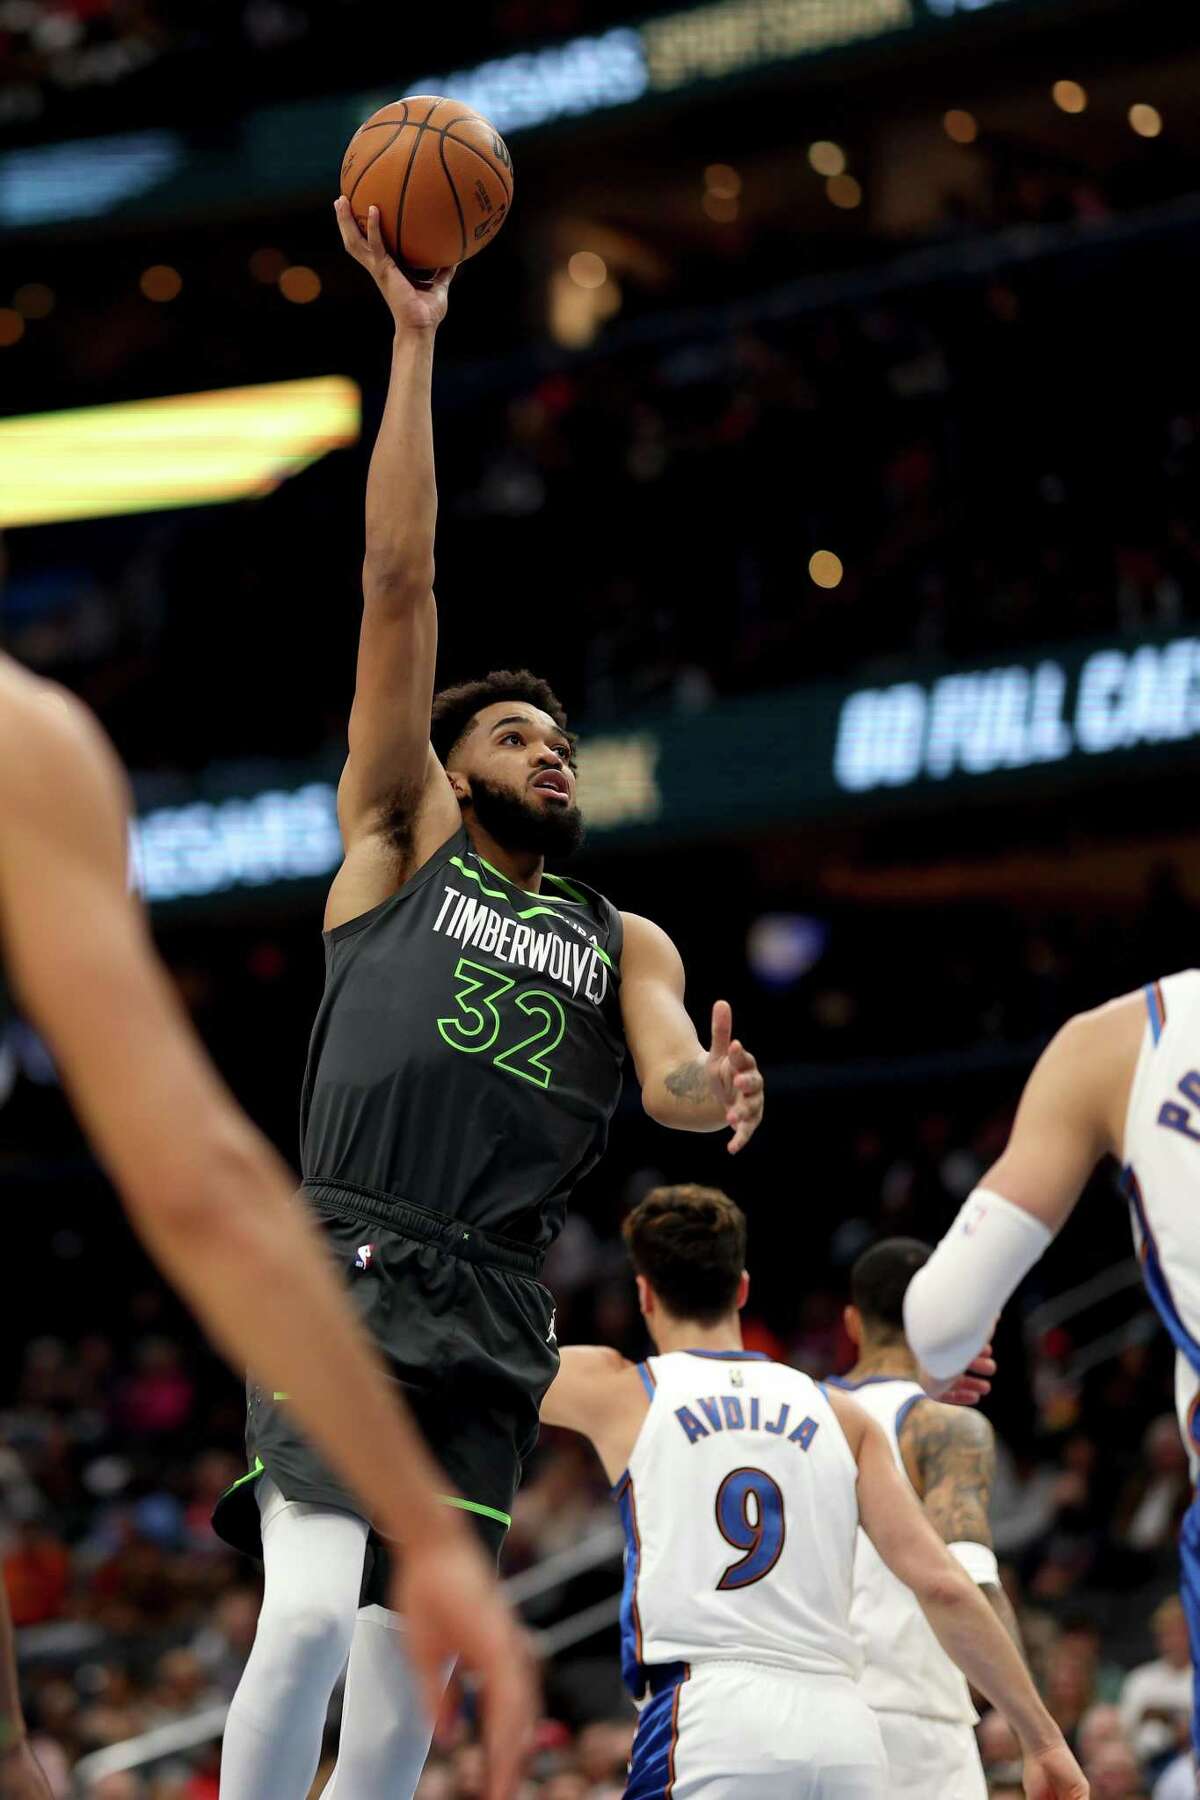 WASHINGTON, DC - NOVEMBER 28: Karl-Anthony Towns #32 of the Minnesota Timberwolves puts up a shot against the Washington Wizards in the first half at Capital One Arena on November 28, 2022 in Washington, DC. NOTE TO USER: User expressly acknowledges and agrees that, by downloading and or using this photograph, User is consenting to the terms and conditions of the Getty Images License Agreement. (Photo by Rob Carr/Getty Images)